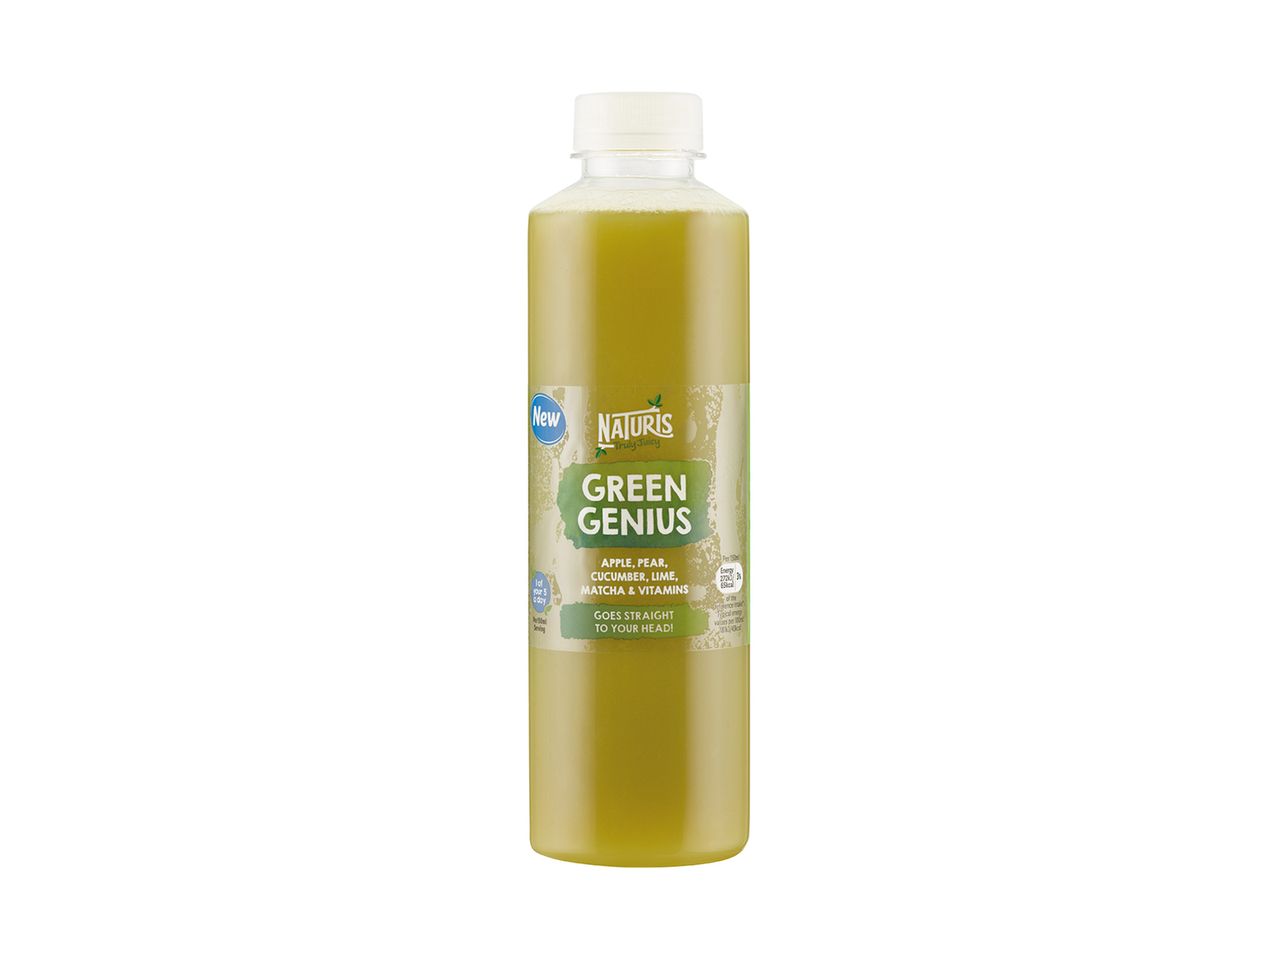 Go to full screen view: Naturis Fruit and Vegetable Juice - Image 1